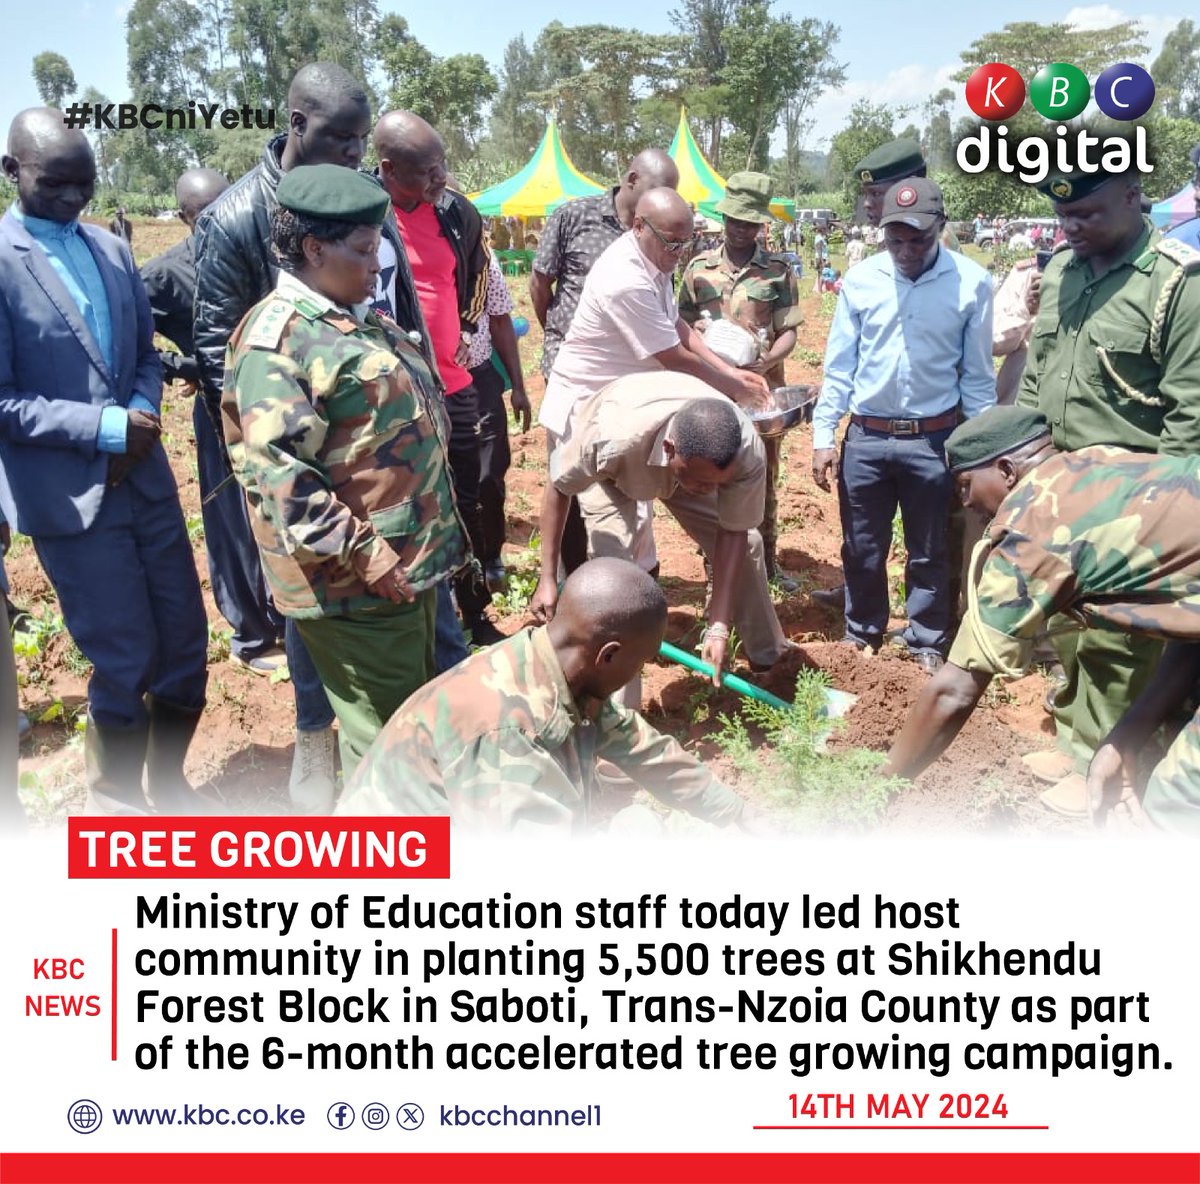 The accelerated 6-month nationwide daily tree growing exercise led by Cabinet Secretaries and Senior Ranks of the Executive championed by His Excellency The President last Friday during the 2nd National Tree Growing Day continues. #JazaMiti,#ClimateActionNow, #15BillionTrees